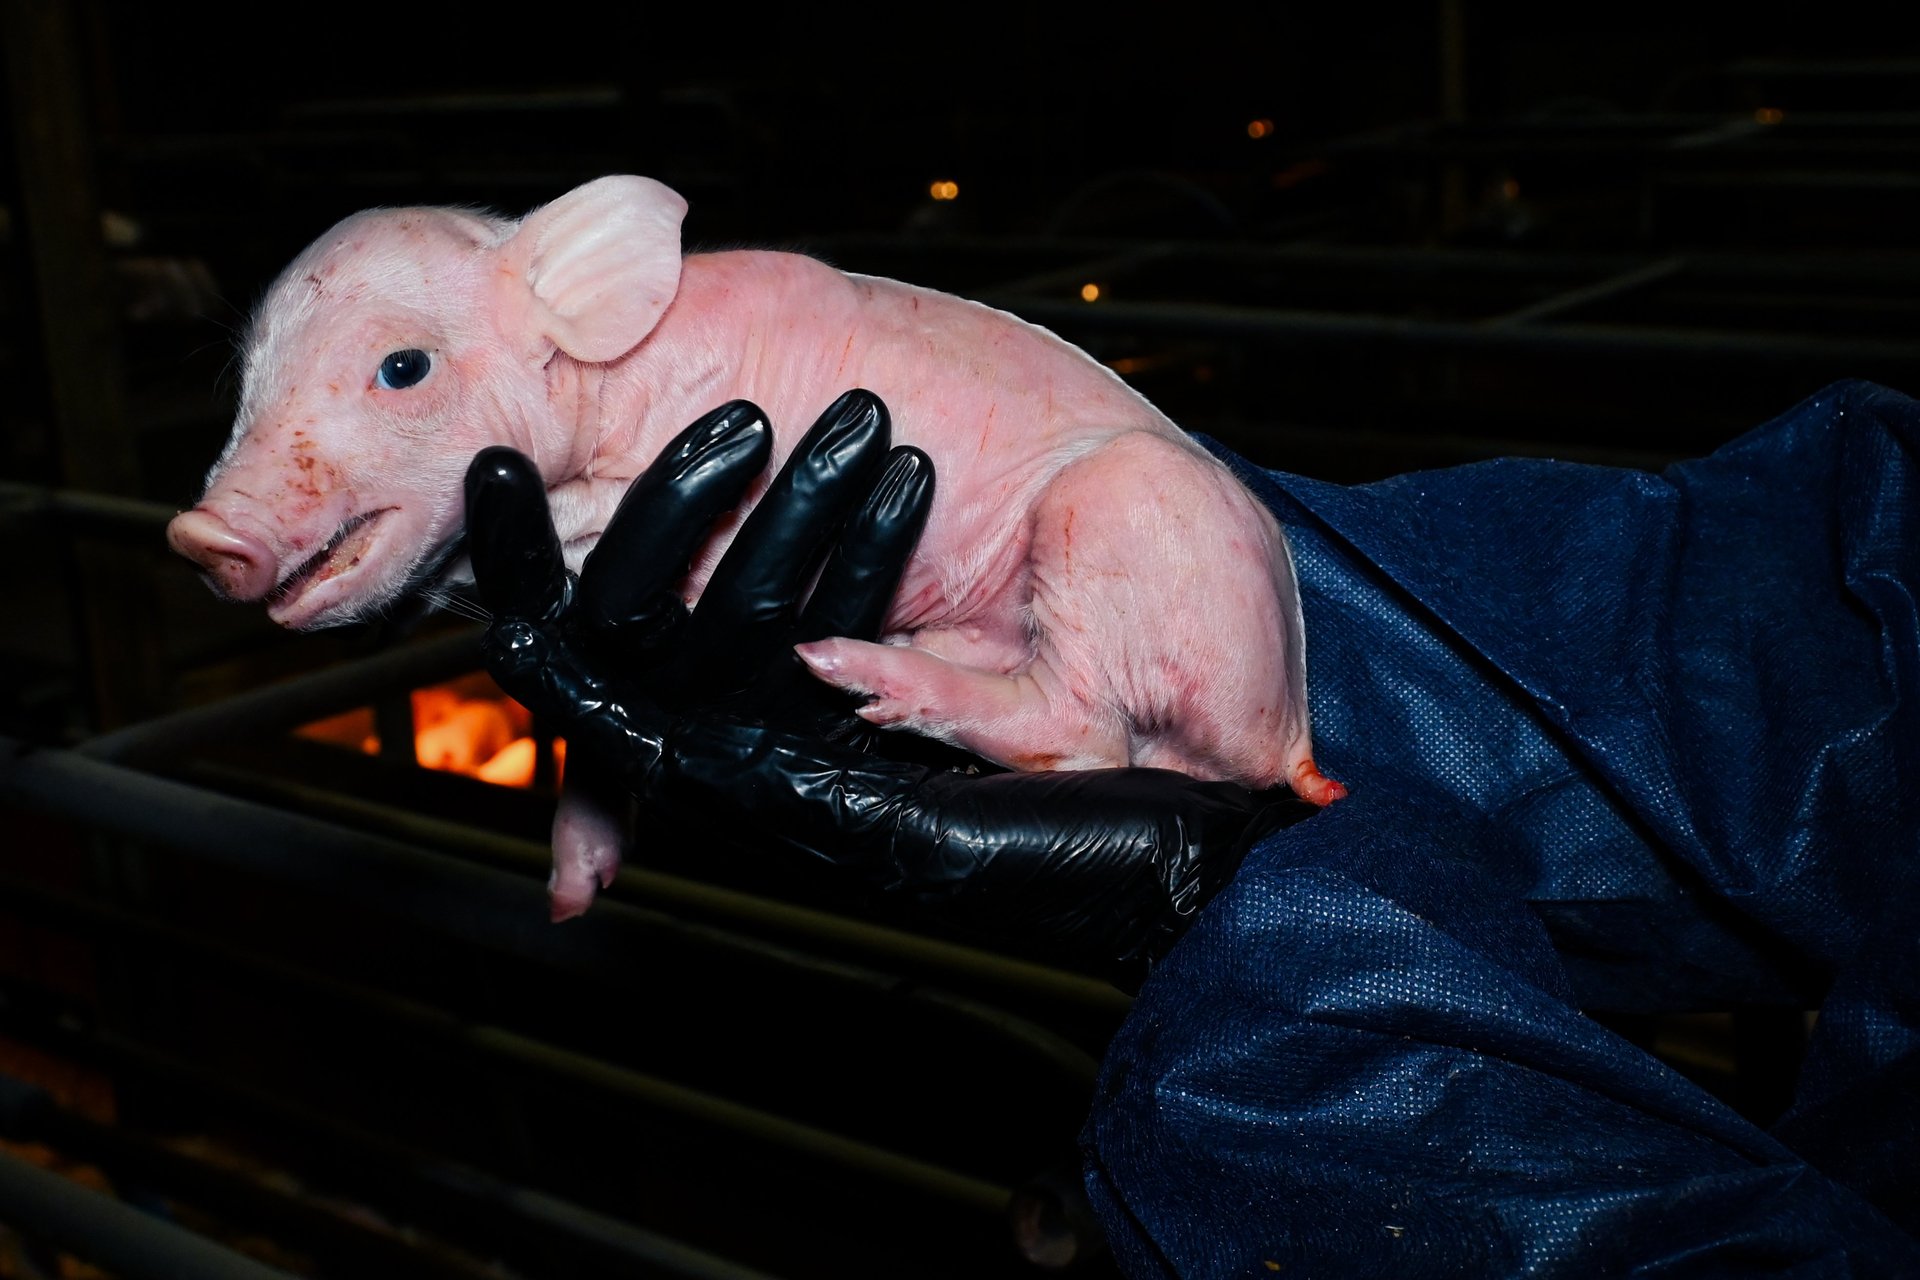 A piglet at a factory farm being carried by someone with black rubber gloves